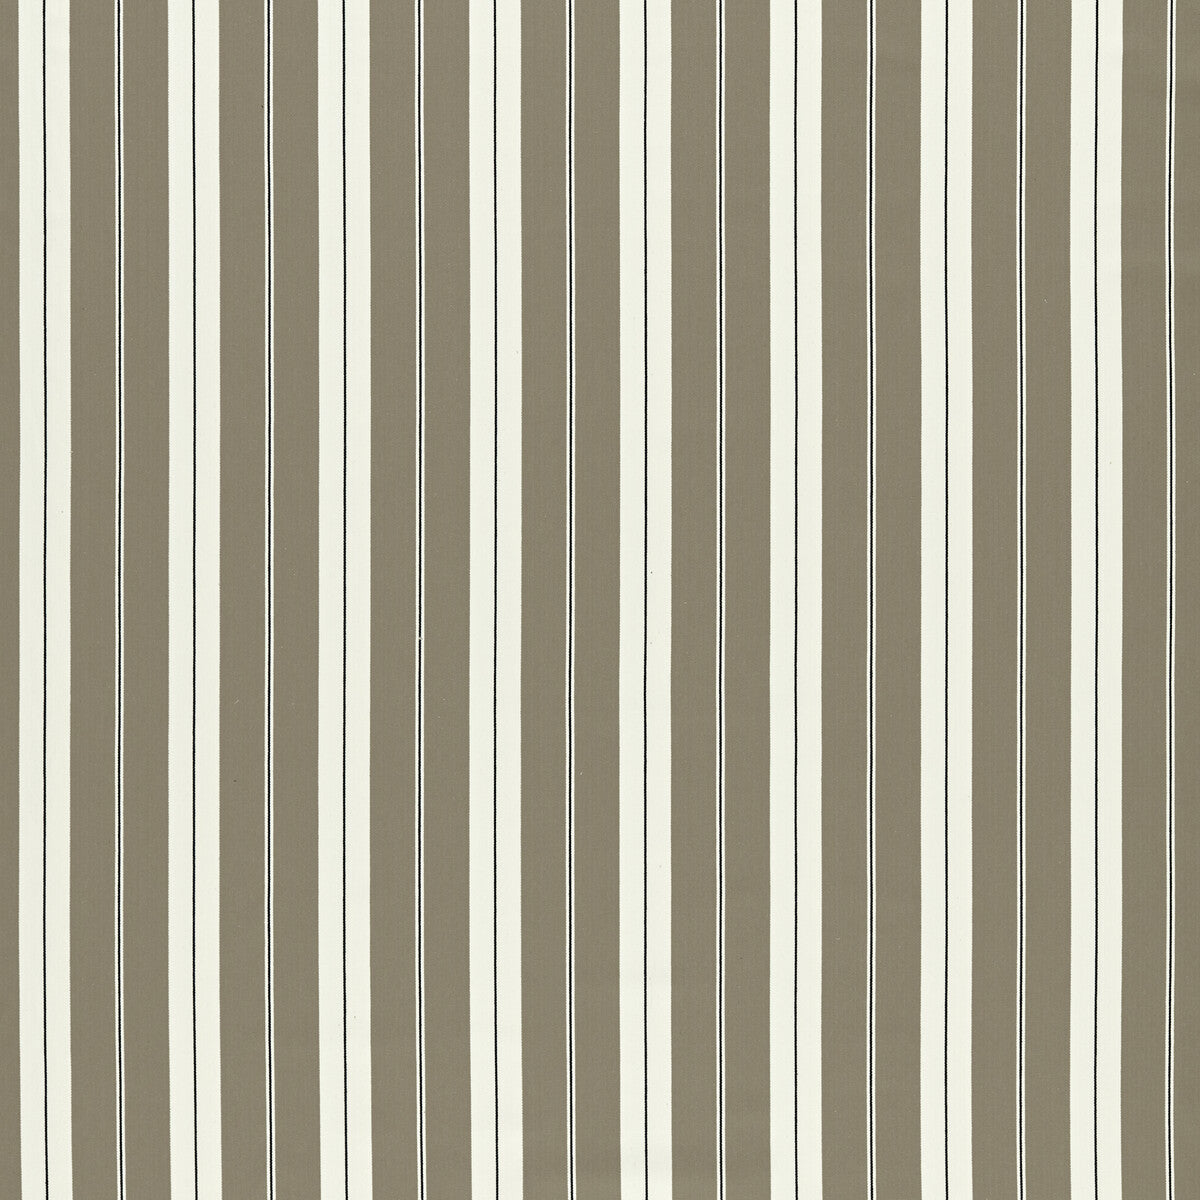 Belgravia fabric in charcoal/linen color - pattern F1497/01.CAC.0 - by Clarke And Clarke in the Clarke &amp; Clarke Edgeworth collection